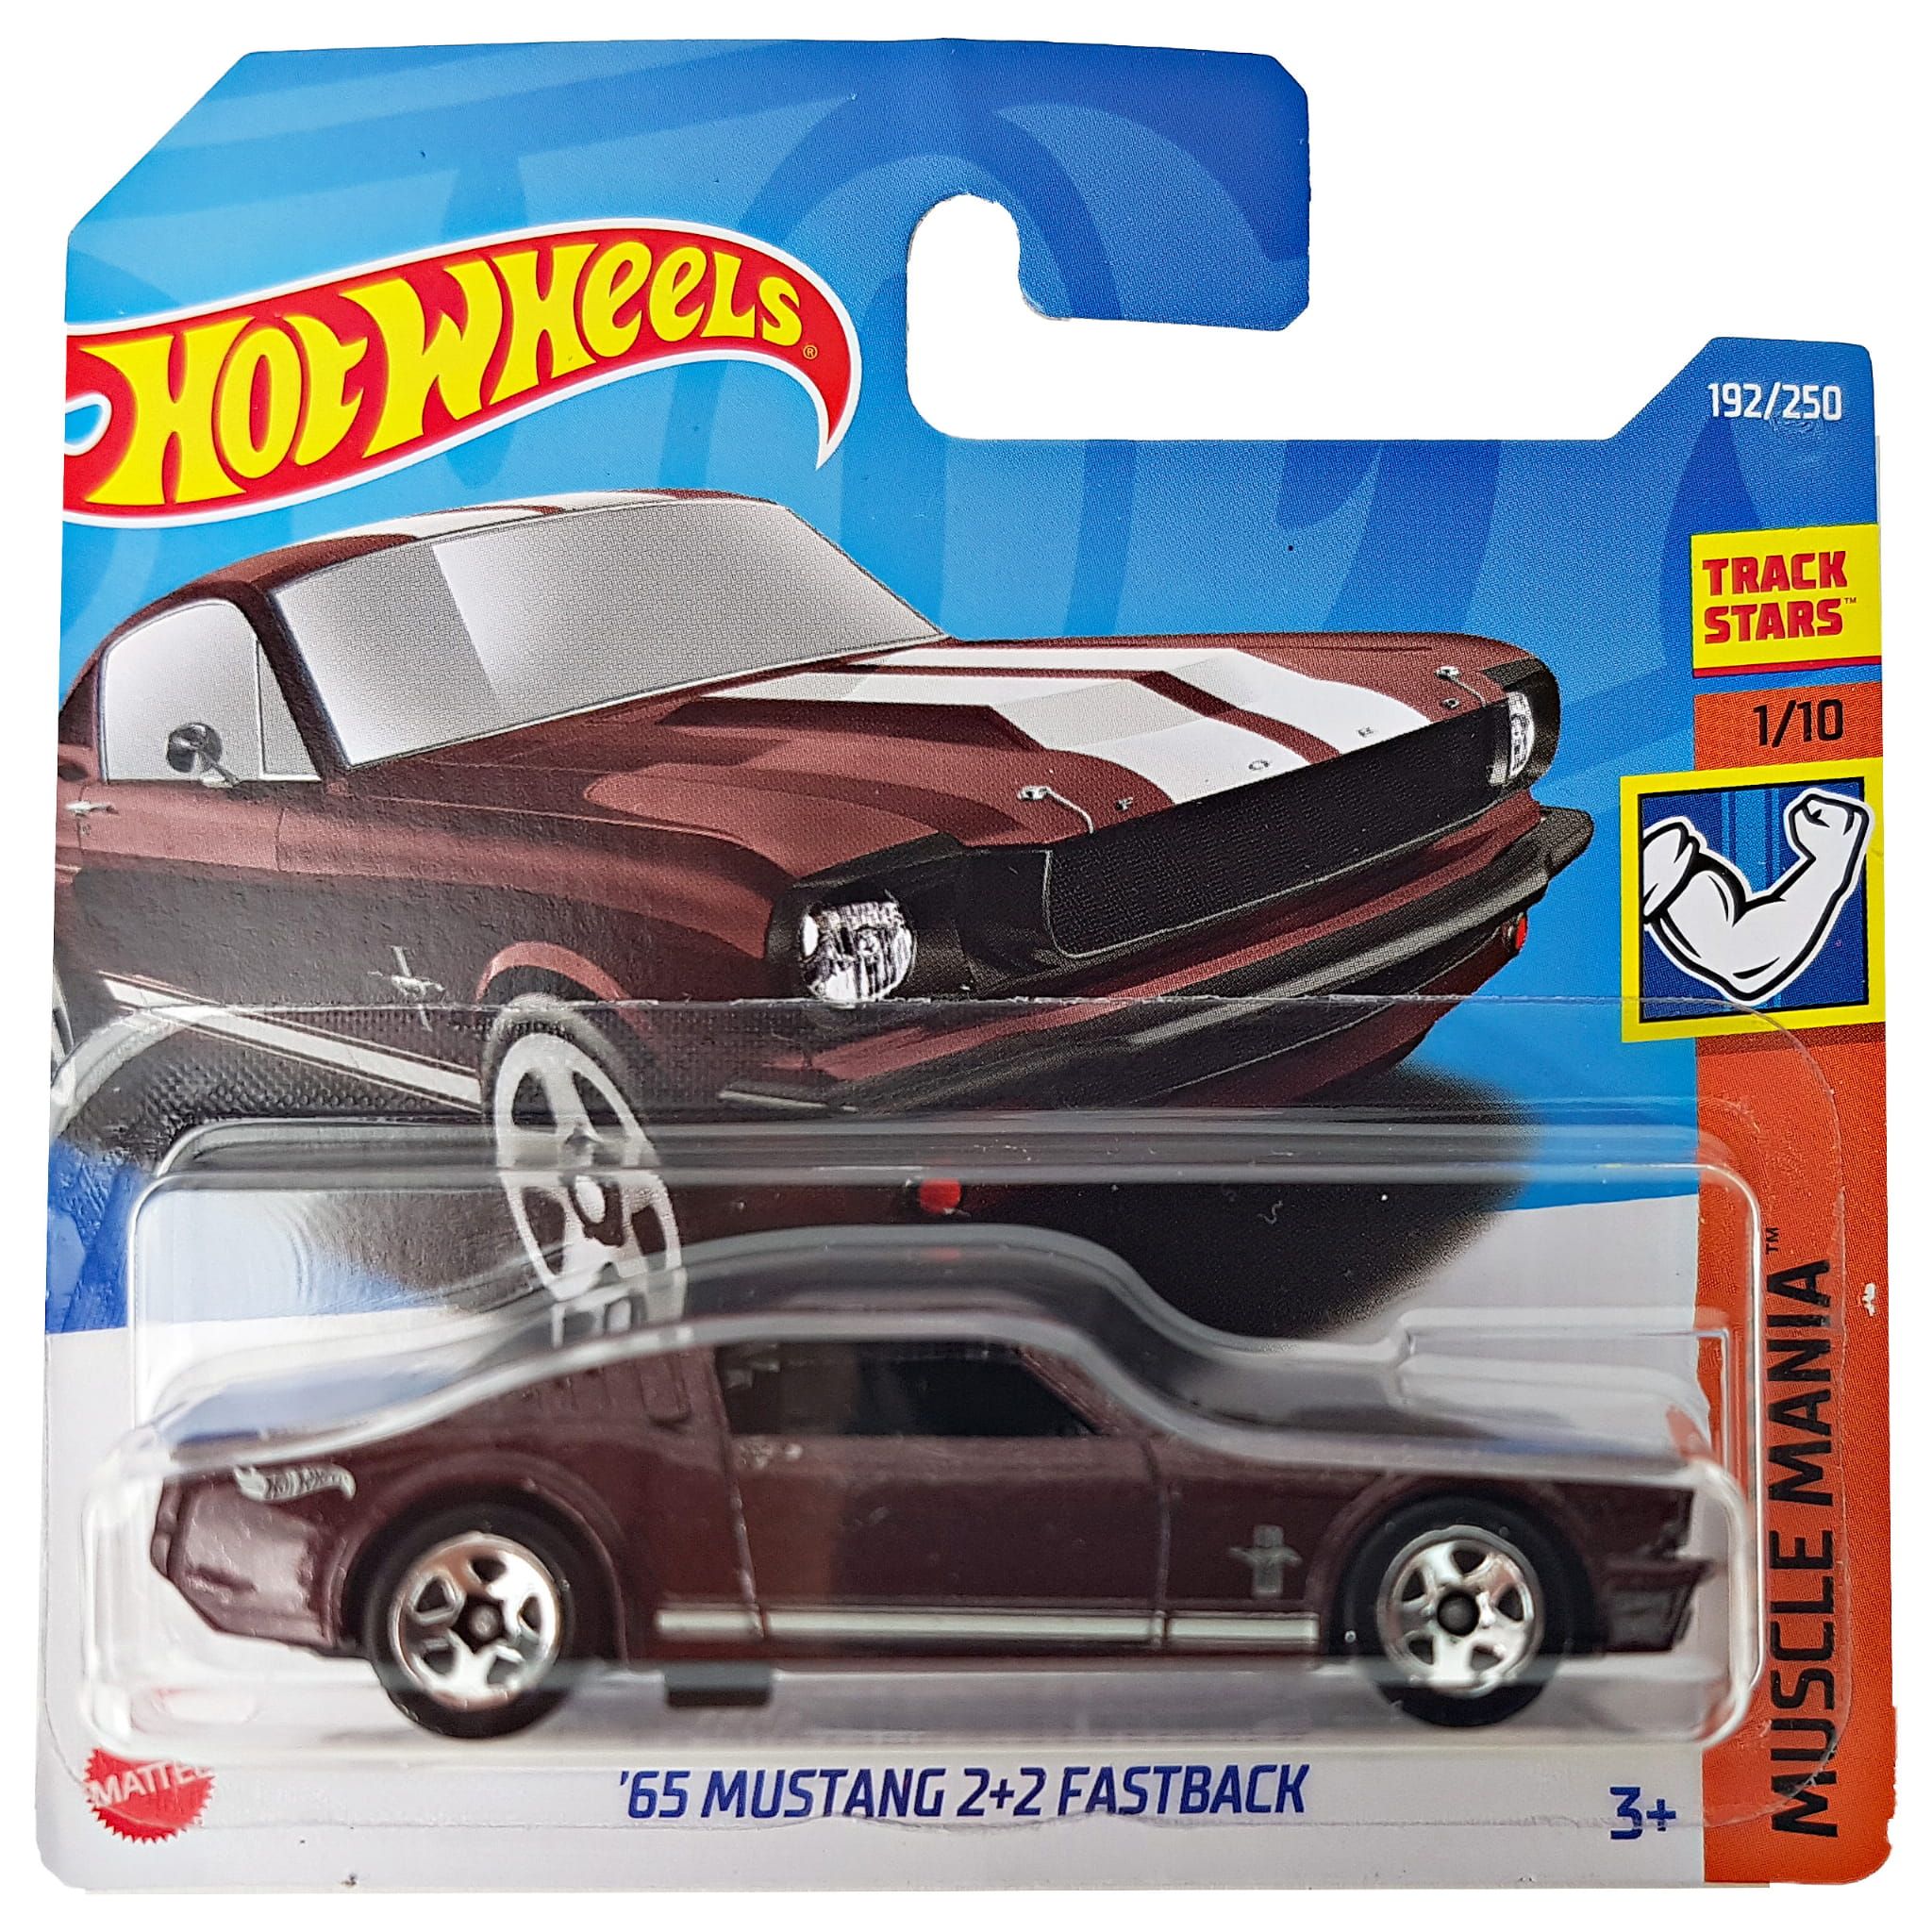 Hot Wheels '65 Mustang 2+2 Fastback Muscle Mania 1/10 - 2022